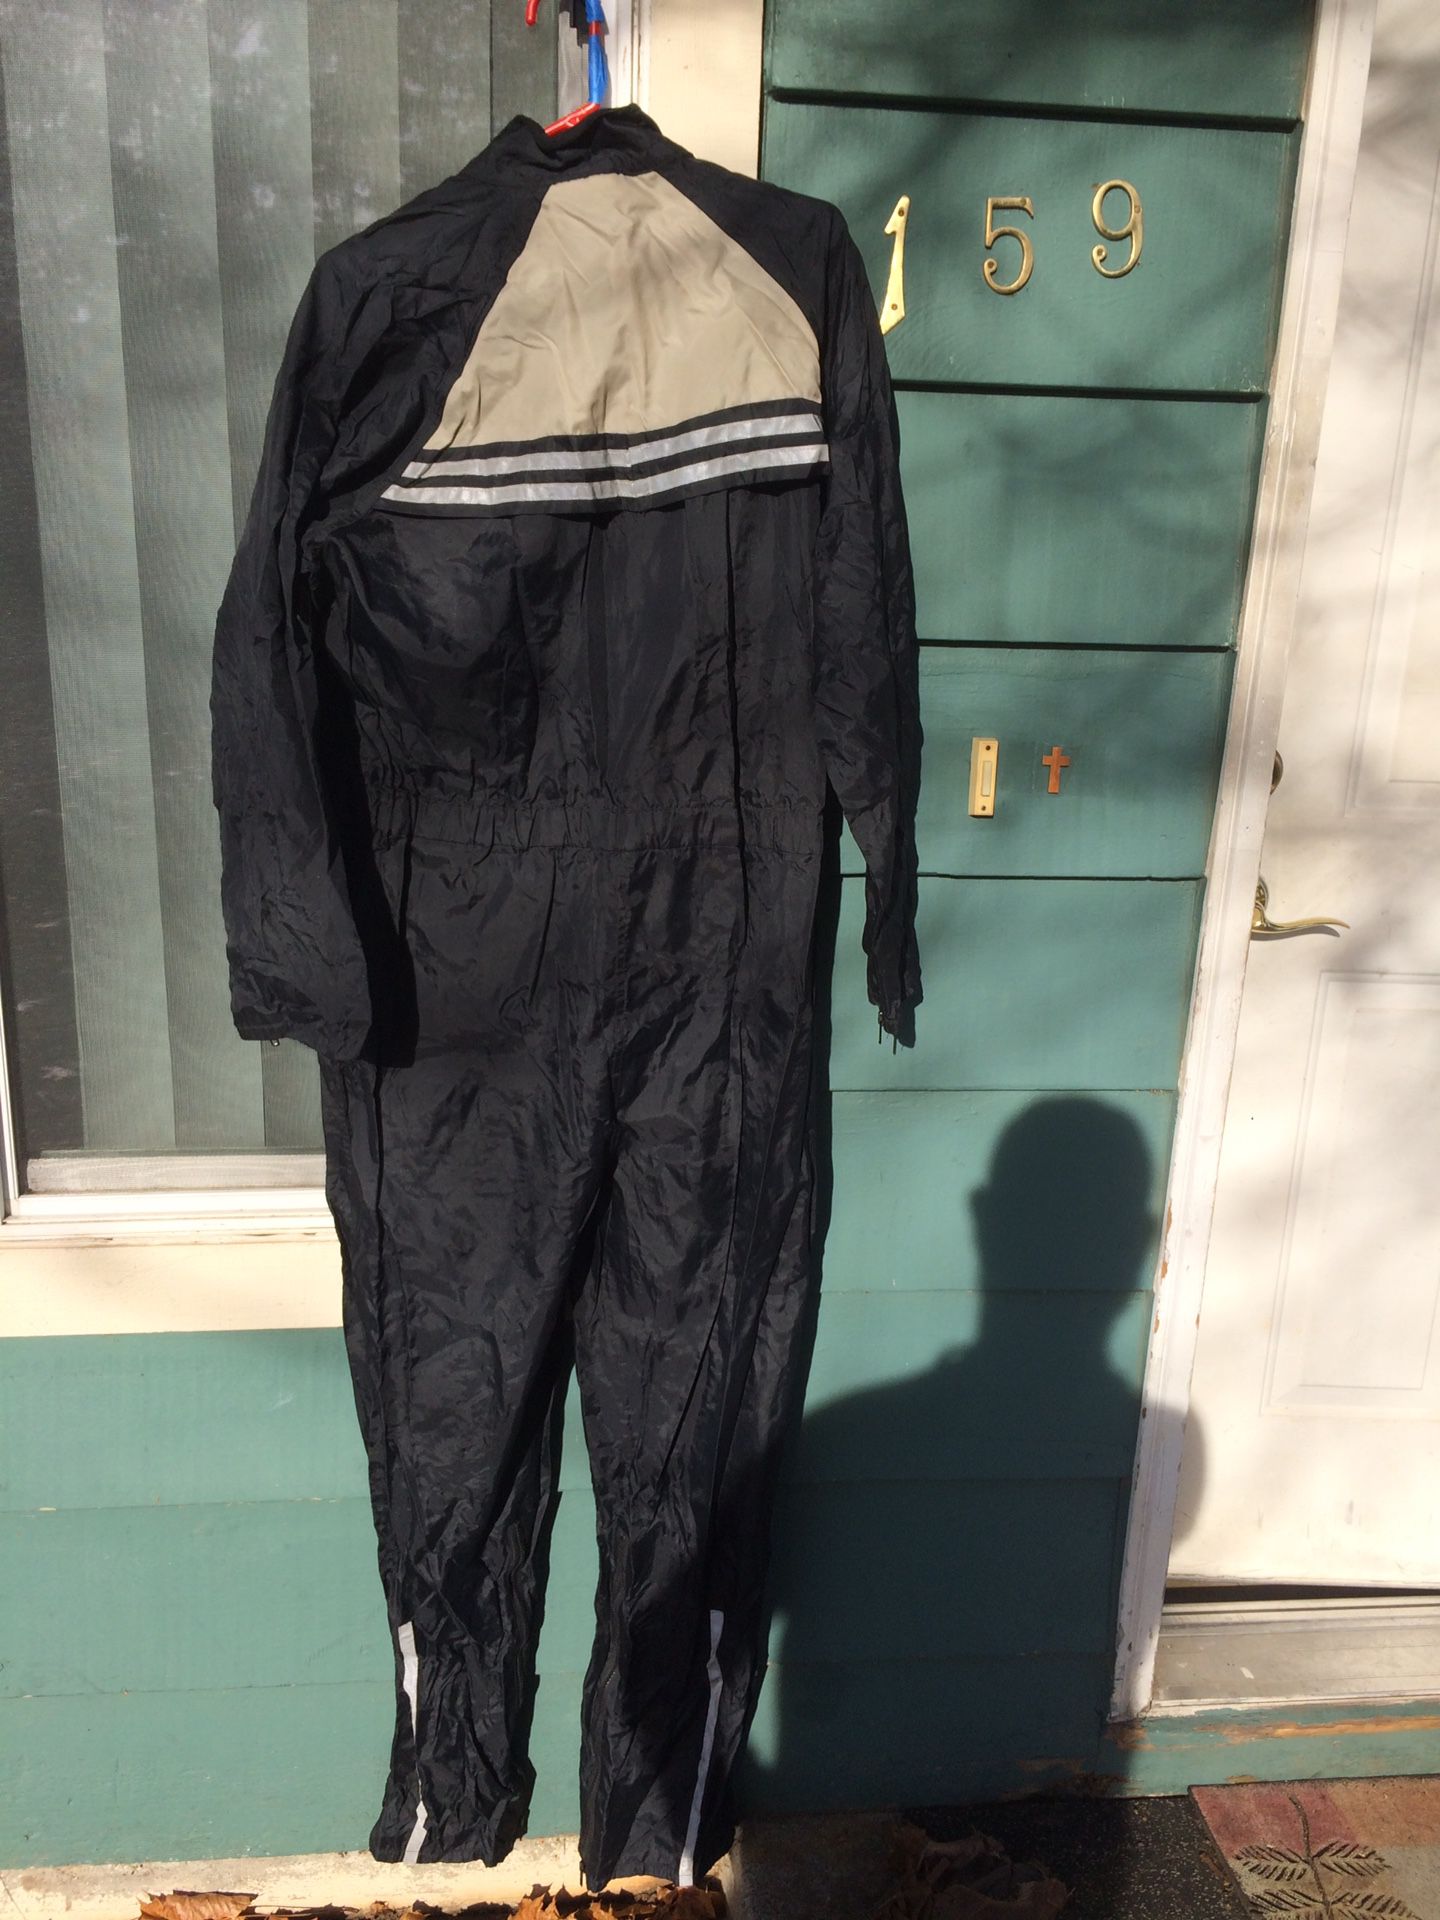 Old Nylon not Goretex snowmobiler or off roader motorcycling suit 15$